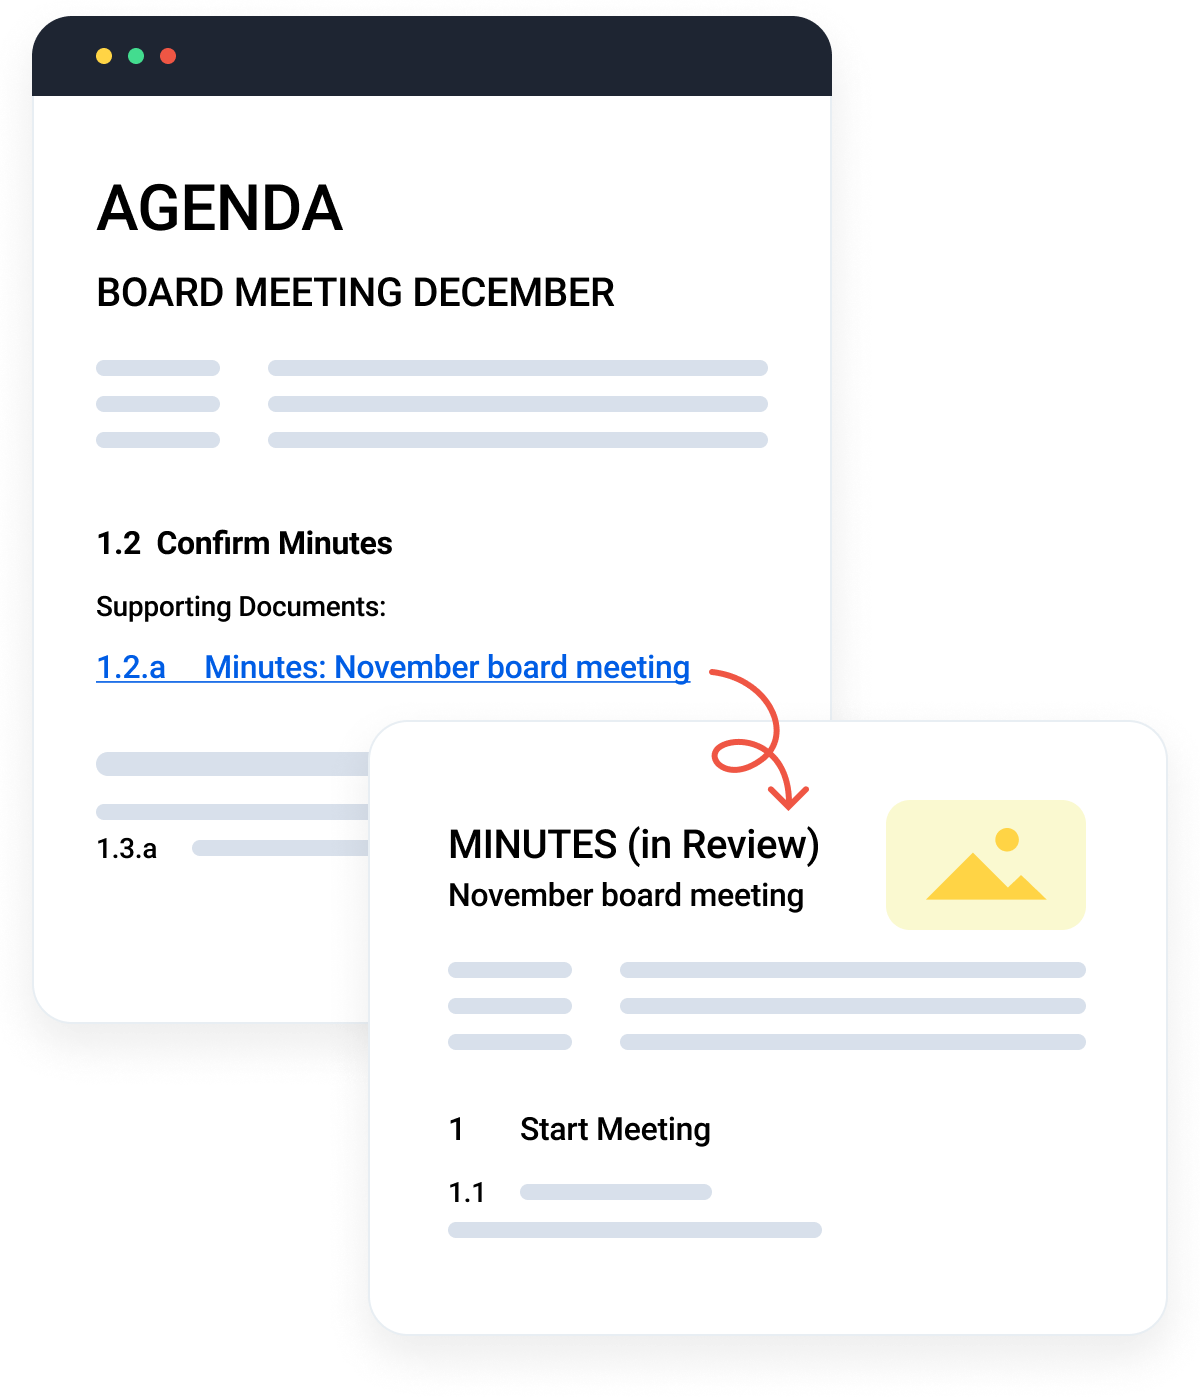 Hyperlinked agenda and meeting papers in the board pack